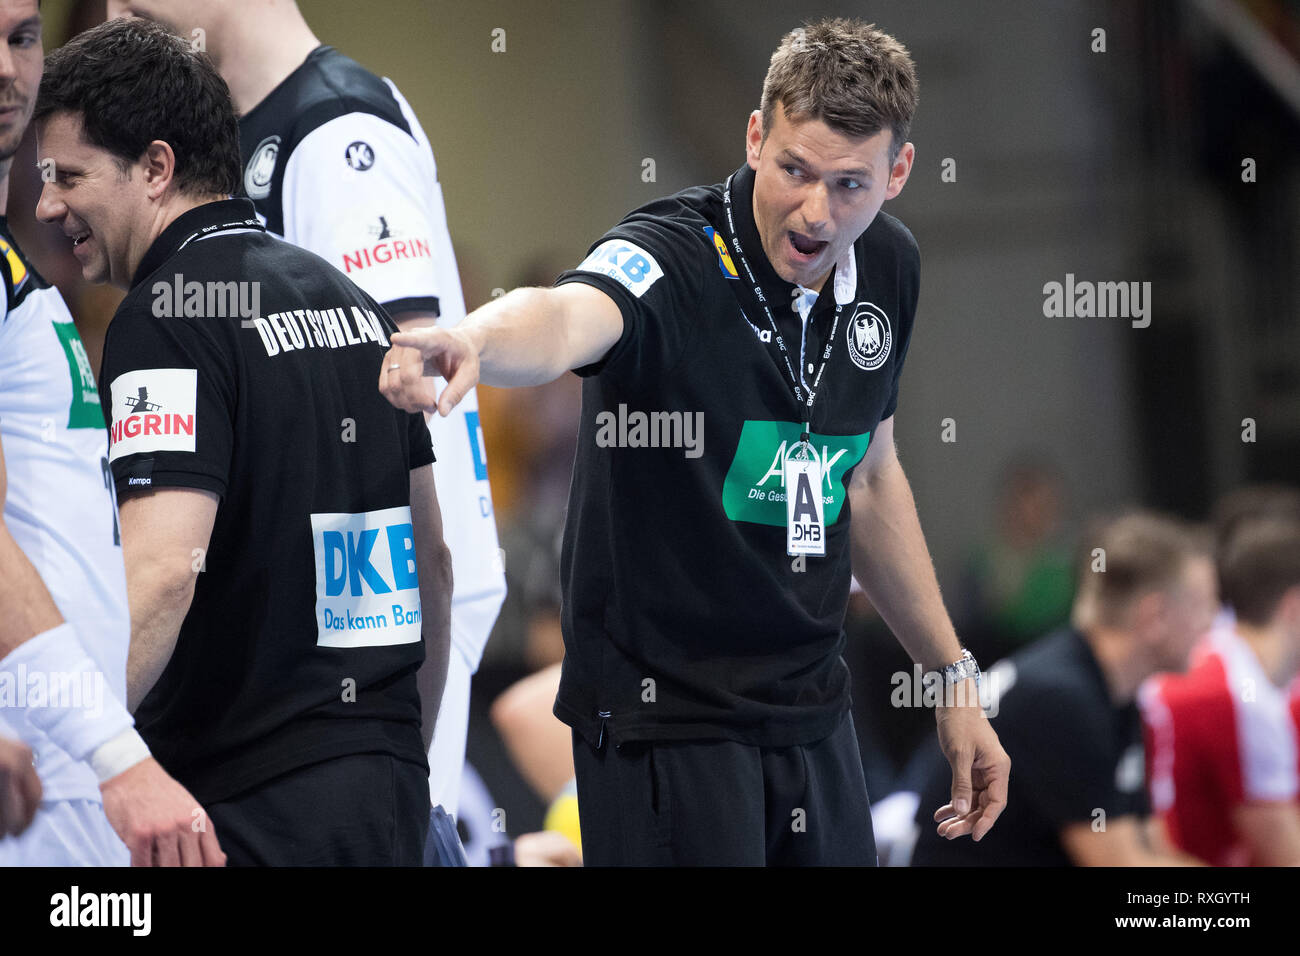 Dusseldorf, Germany. 9th March 2019. Handball: International match, Germany - Switzerland in the ISS Dome. Germany's coach Christian Prokop gives instructions. Photo: Federico Gambarini/dpa Credit: dpa picture alliance/Alamy Live News Stock Photo